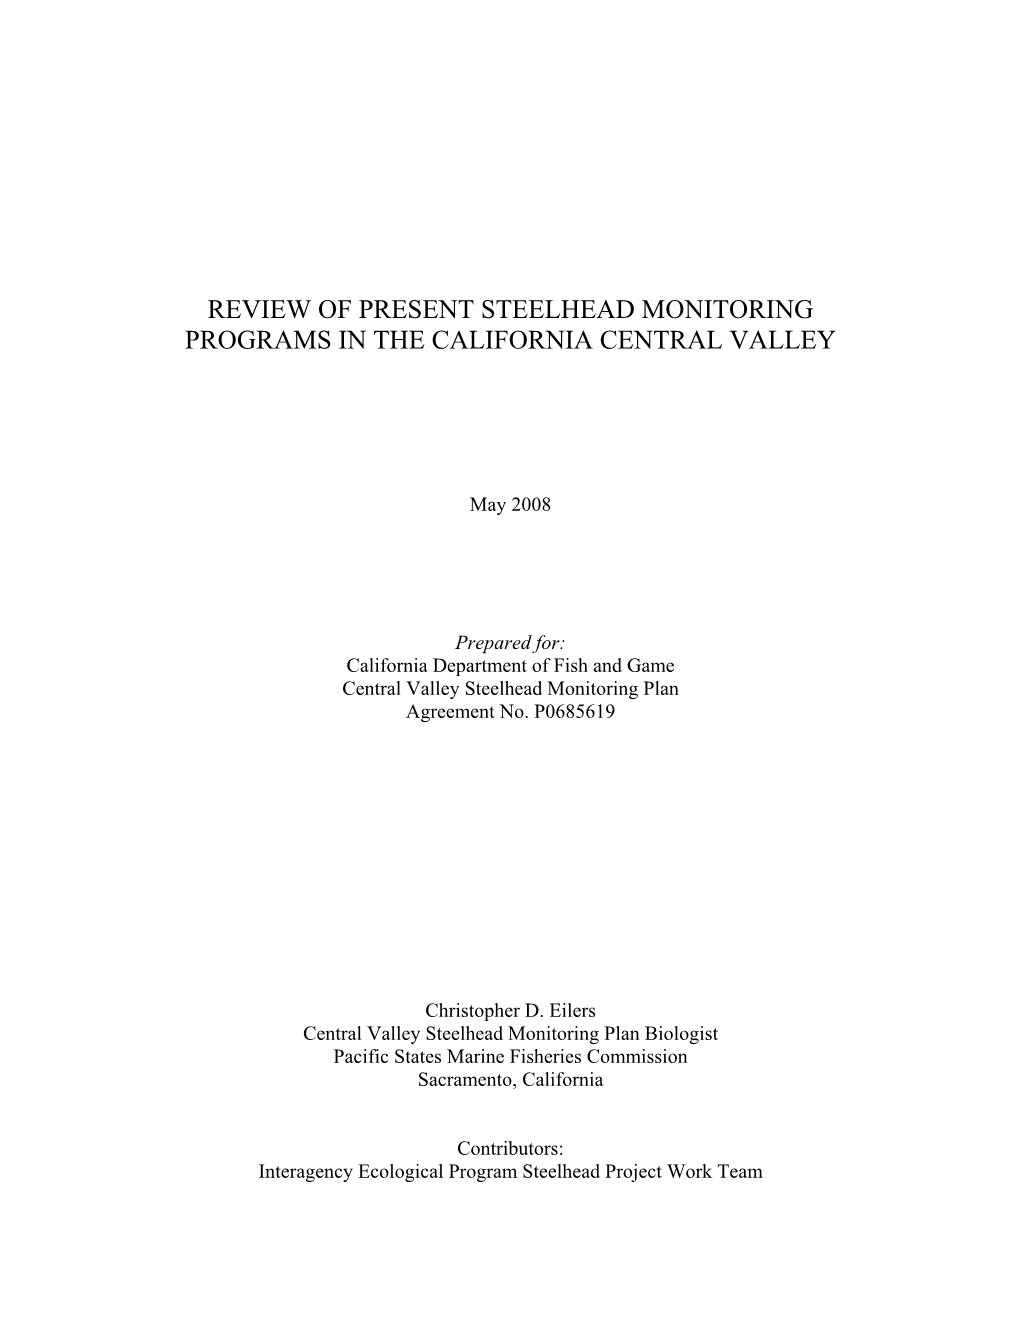 Review of Present Steelhead Monitoring Programs in the California Central Valley